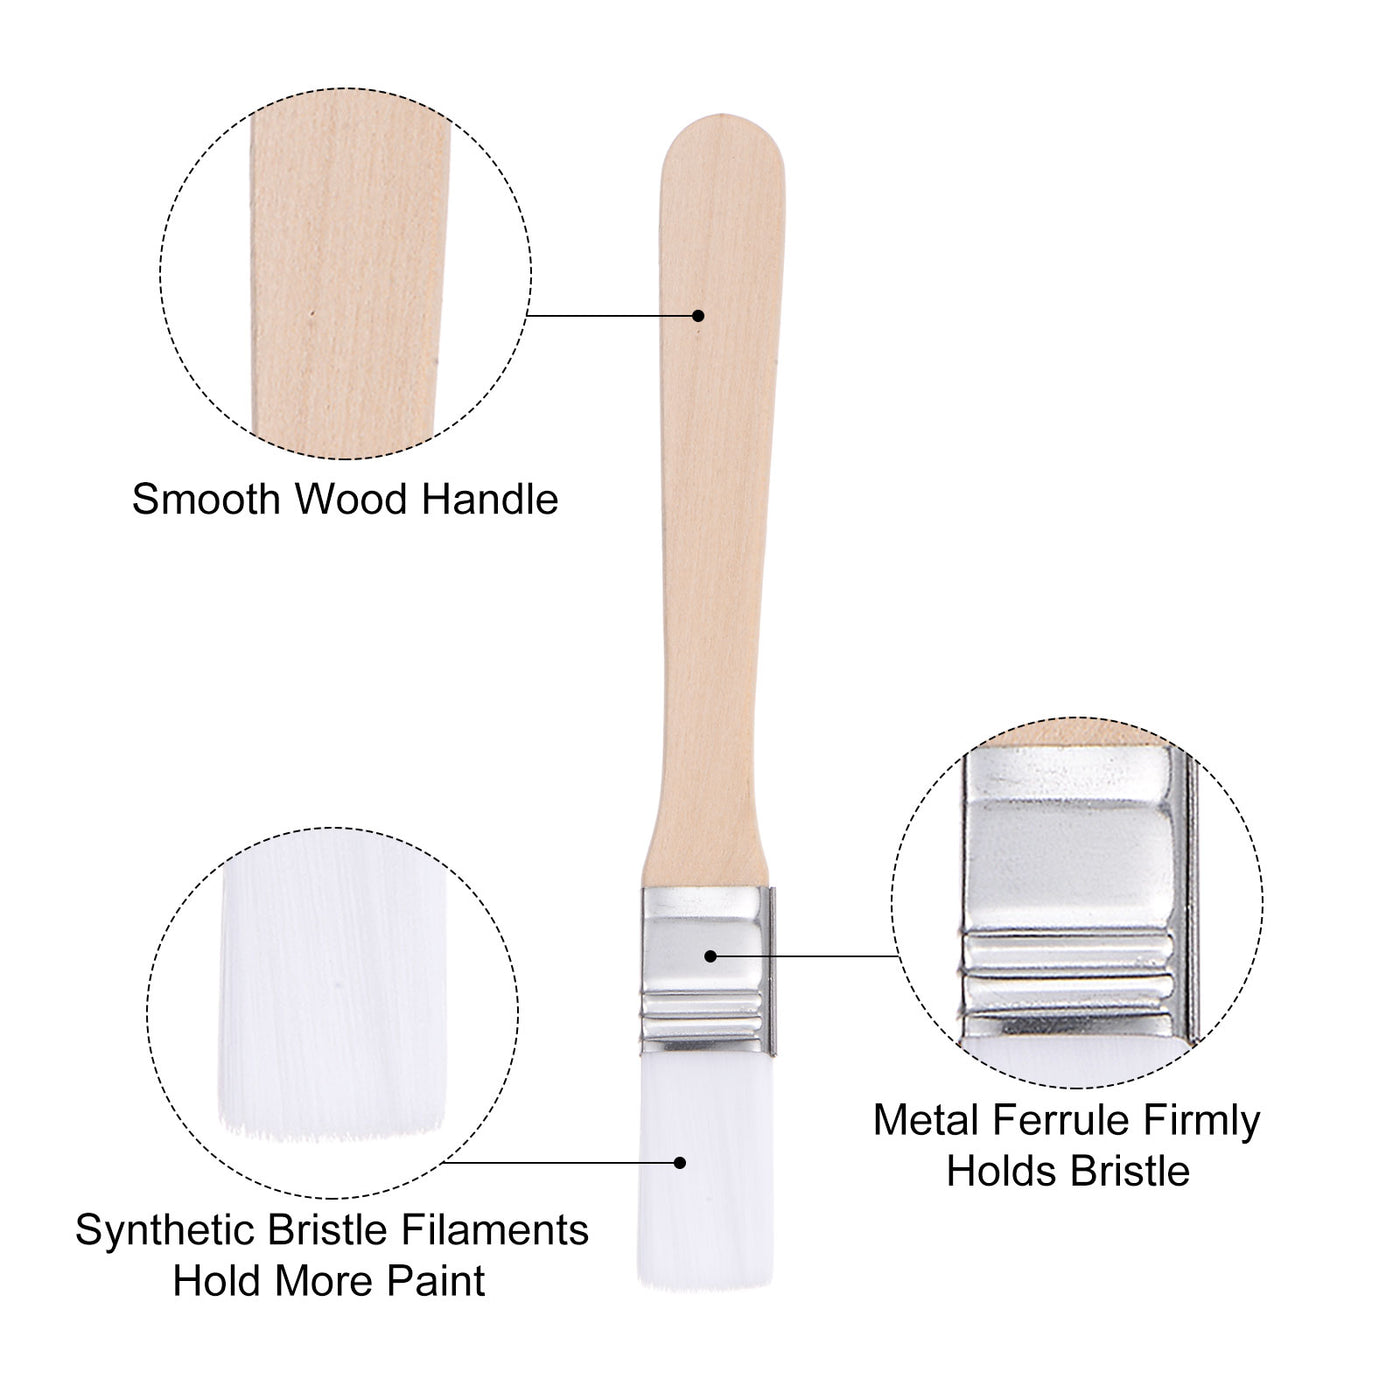 uxcell Uxcell 0.6" Width Small Paint Brush Nylon Bristle with Wood Handle Tool, White 10Pcs